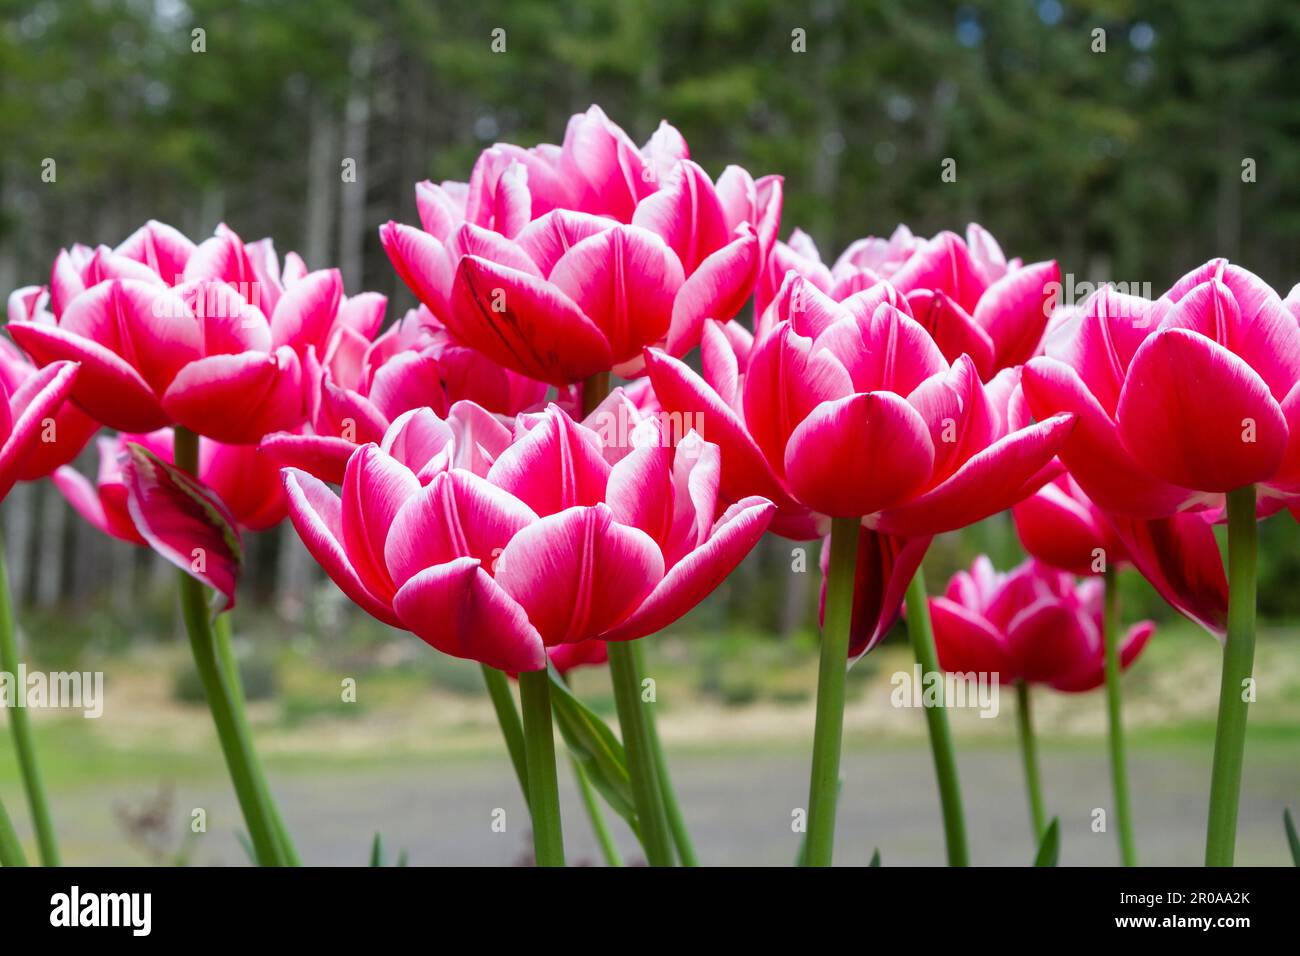 Deep pink Columbus double tulips (Tulipa) with bright white edges provide dramatic bold color in a spring garden. Stock Photo